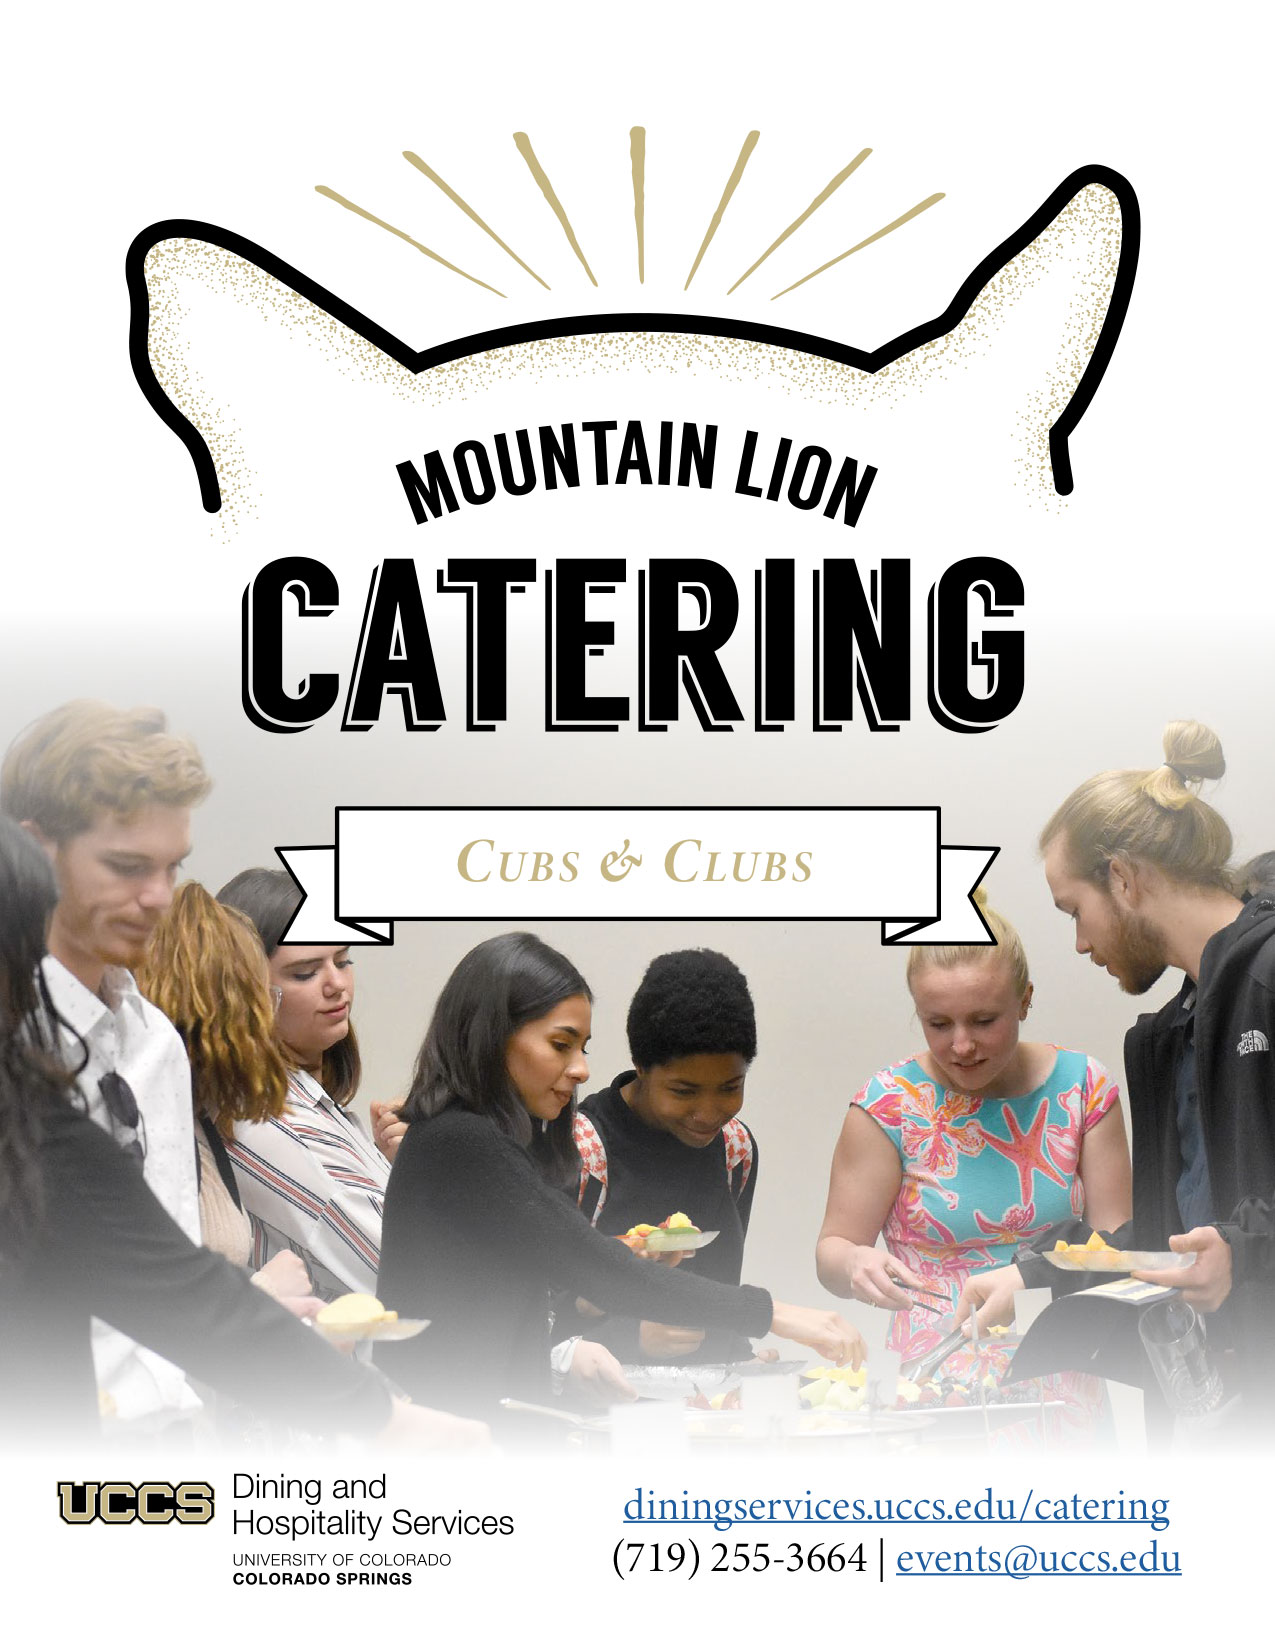 Cubs & Clubs Budget Catering Menu Cover